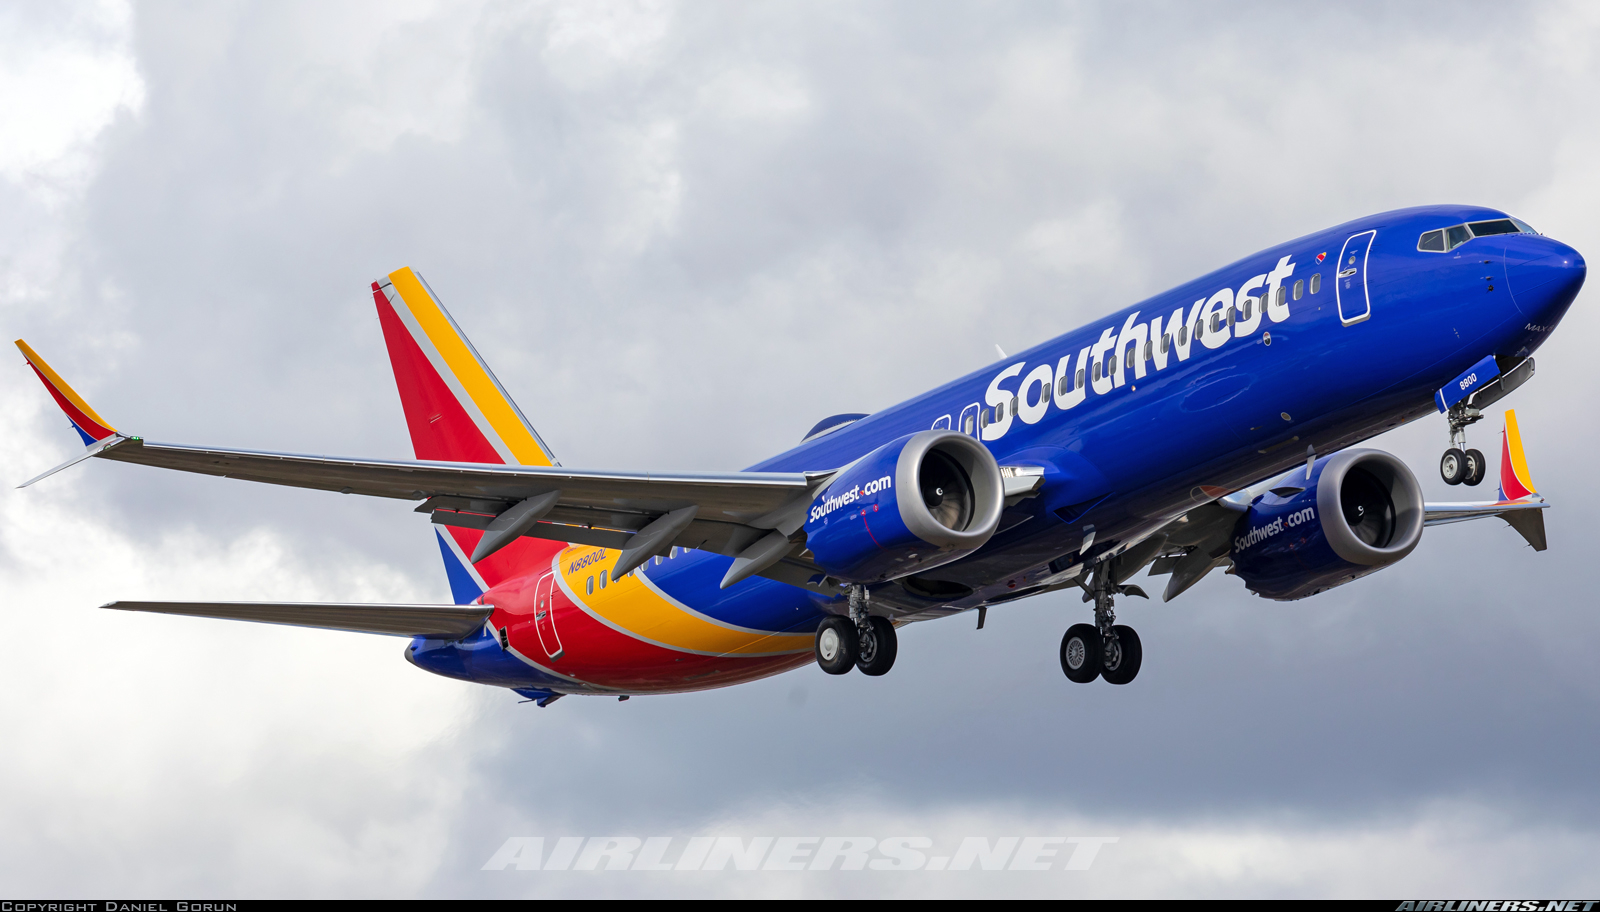 Boeing 737-8 MAX - Southwest Airlines | Aviation Photo #5941711 ...